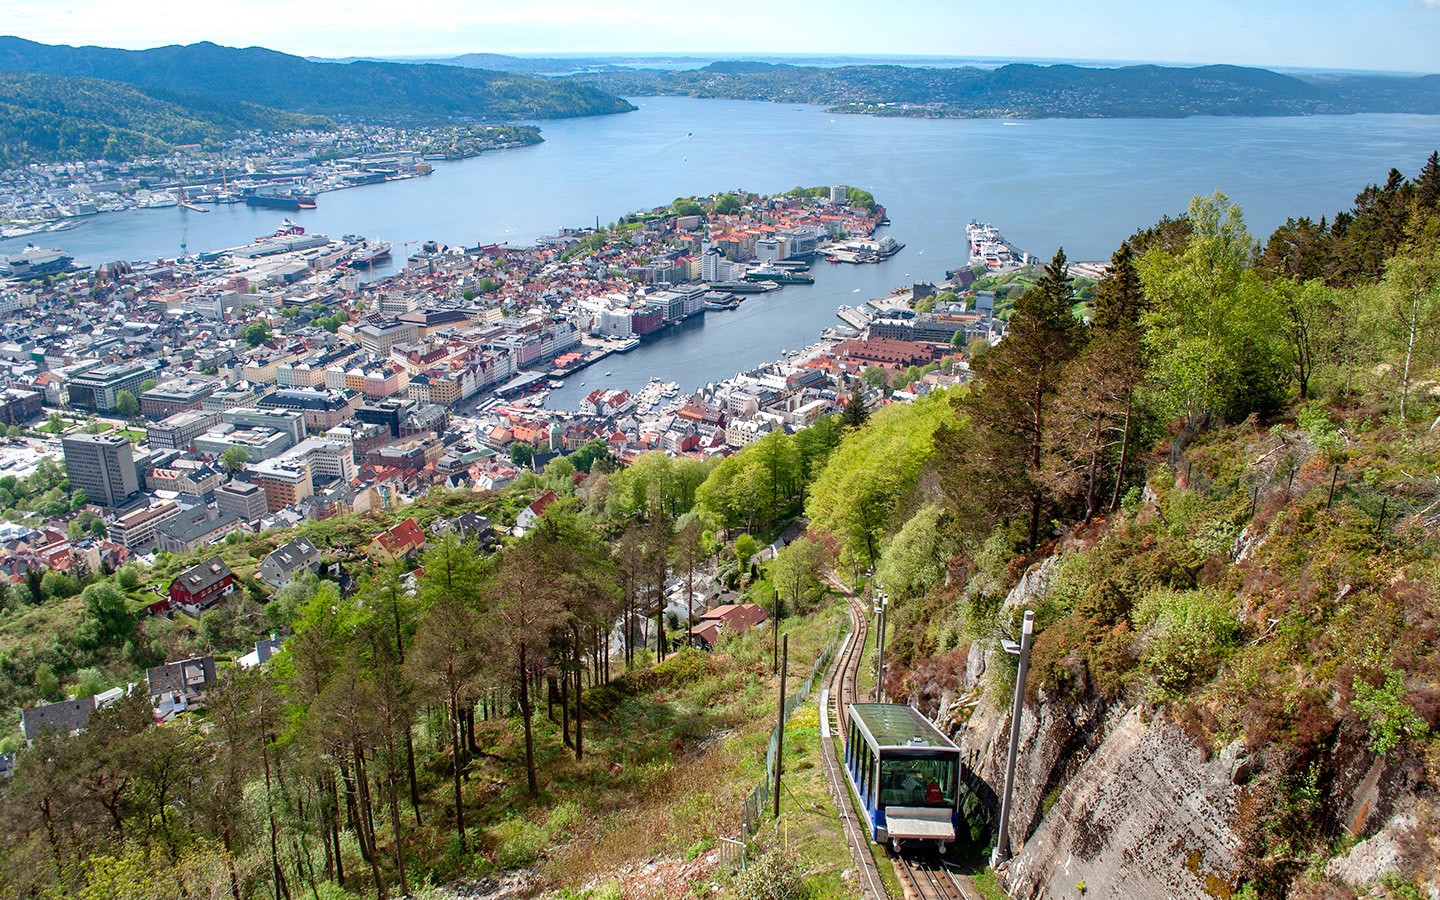 The Fløibanen funicular railway in Bergen at the end of the trip through Scandinavia by train